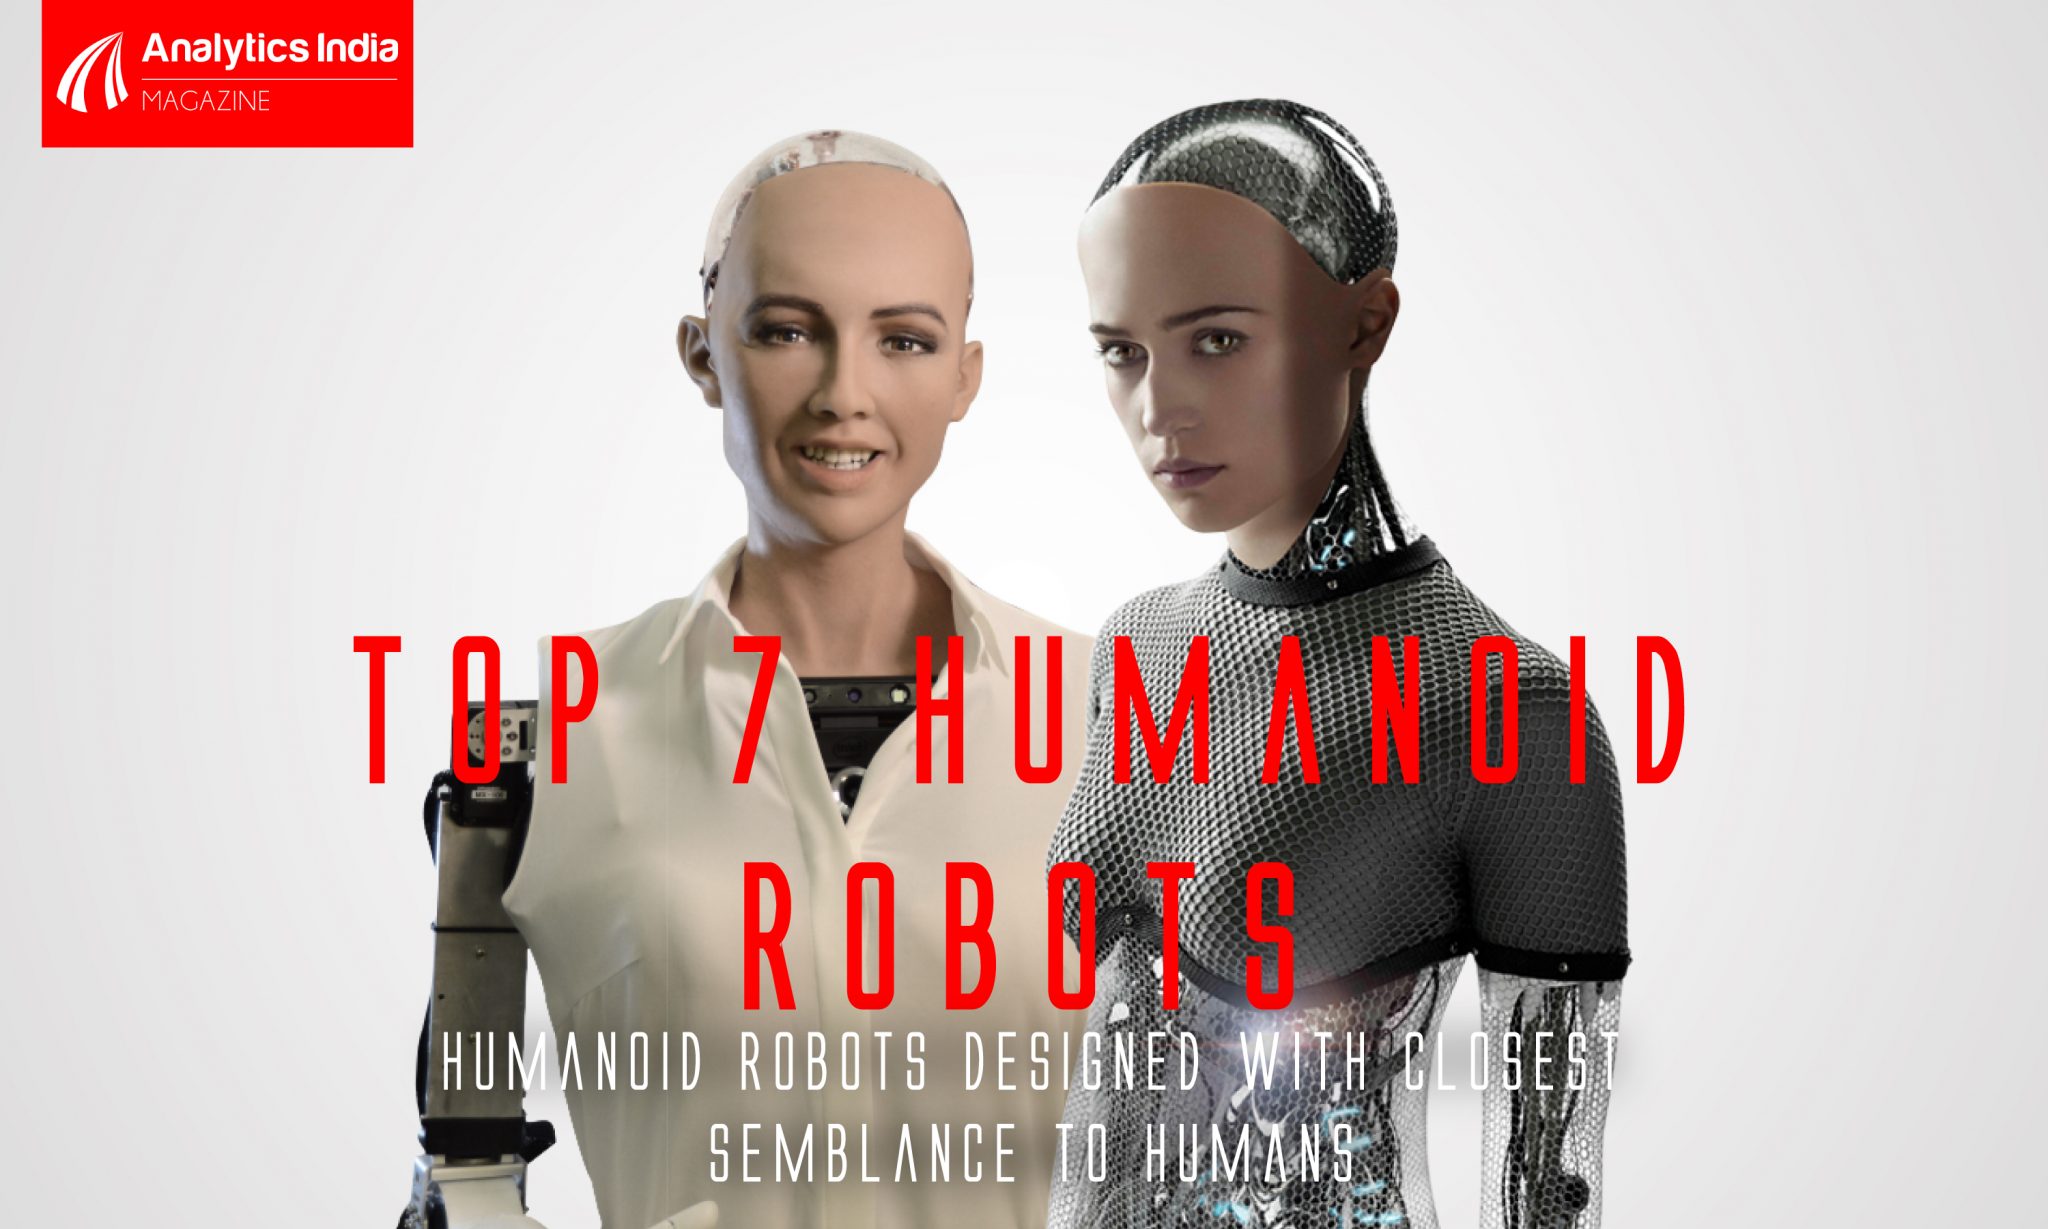 Humanoid Robots Designed With Closest Semblance To Humans